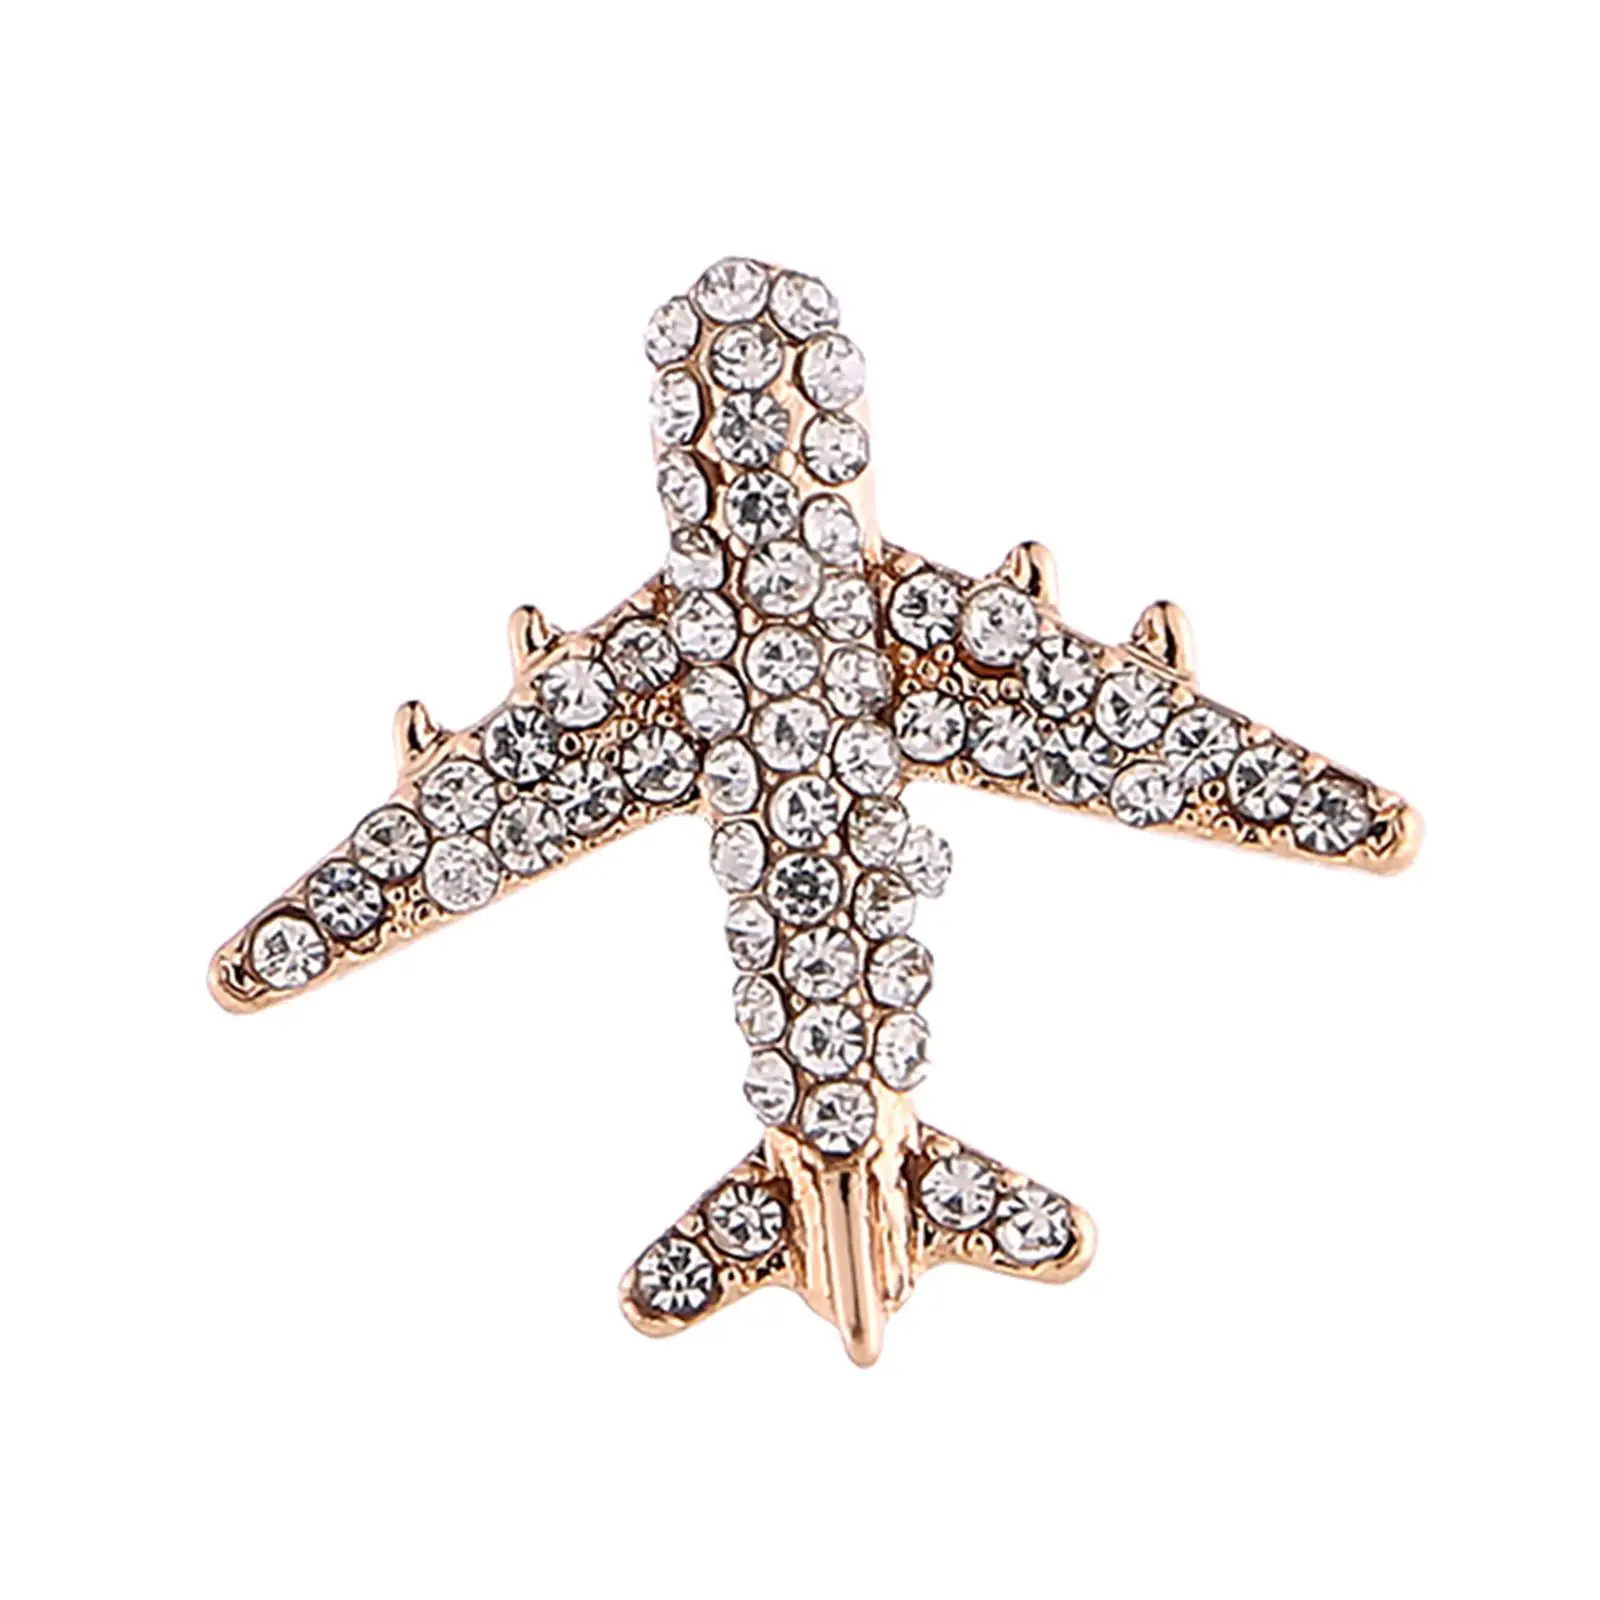 Airplane Brooch Pin Premium Durable Rhinestones Fashion Style Fashion Jewelry Accessories for Scarf Shawl Dance Ceremony Father